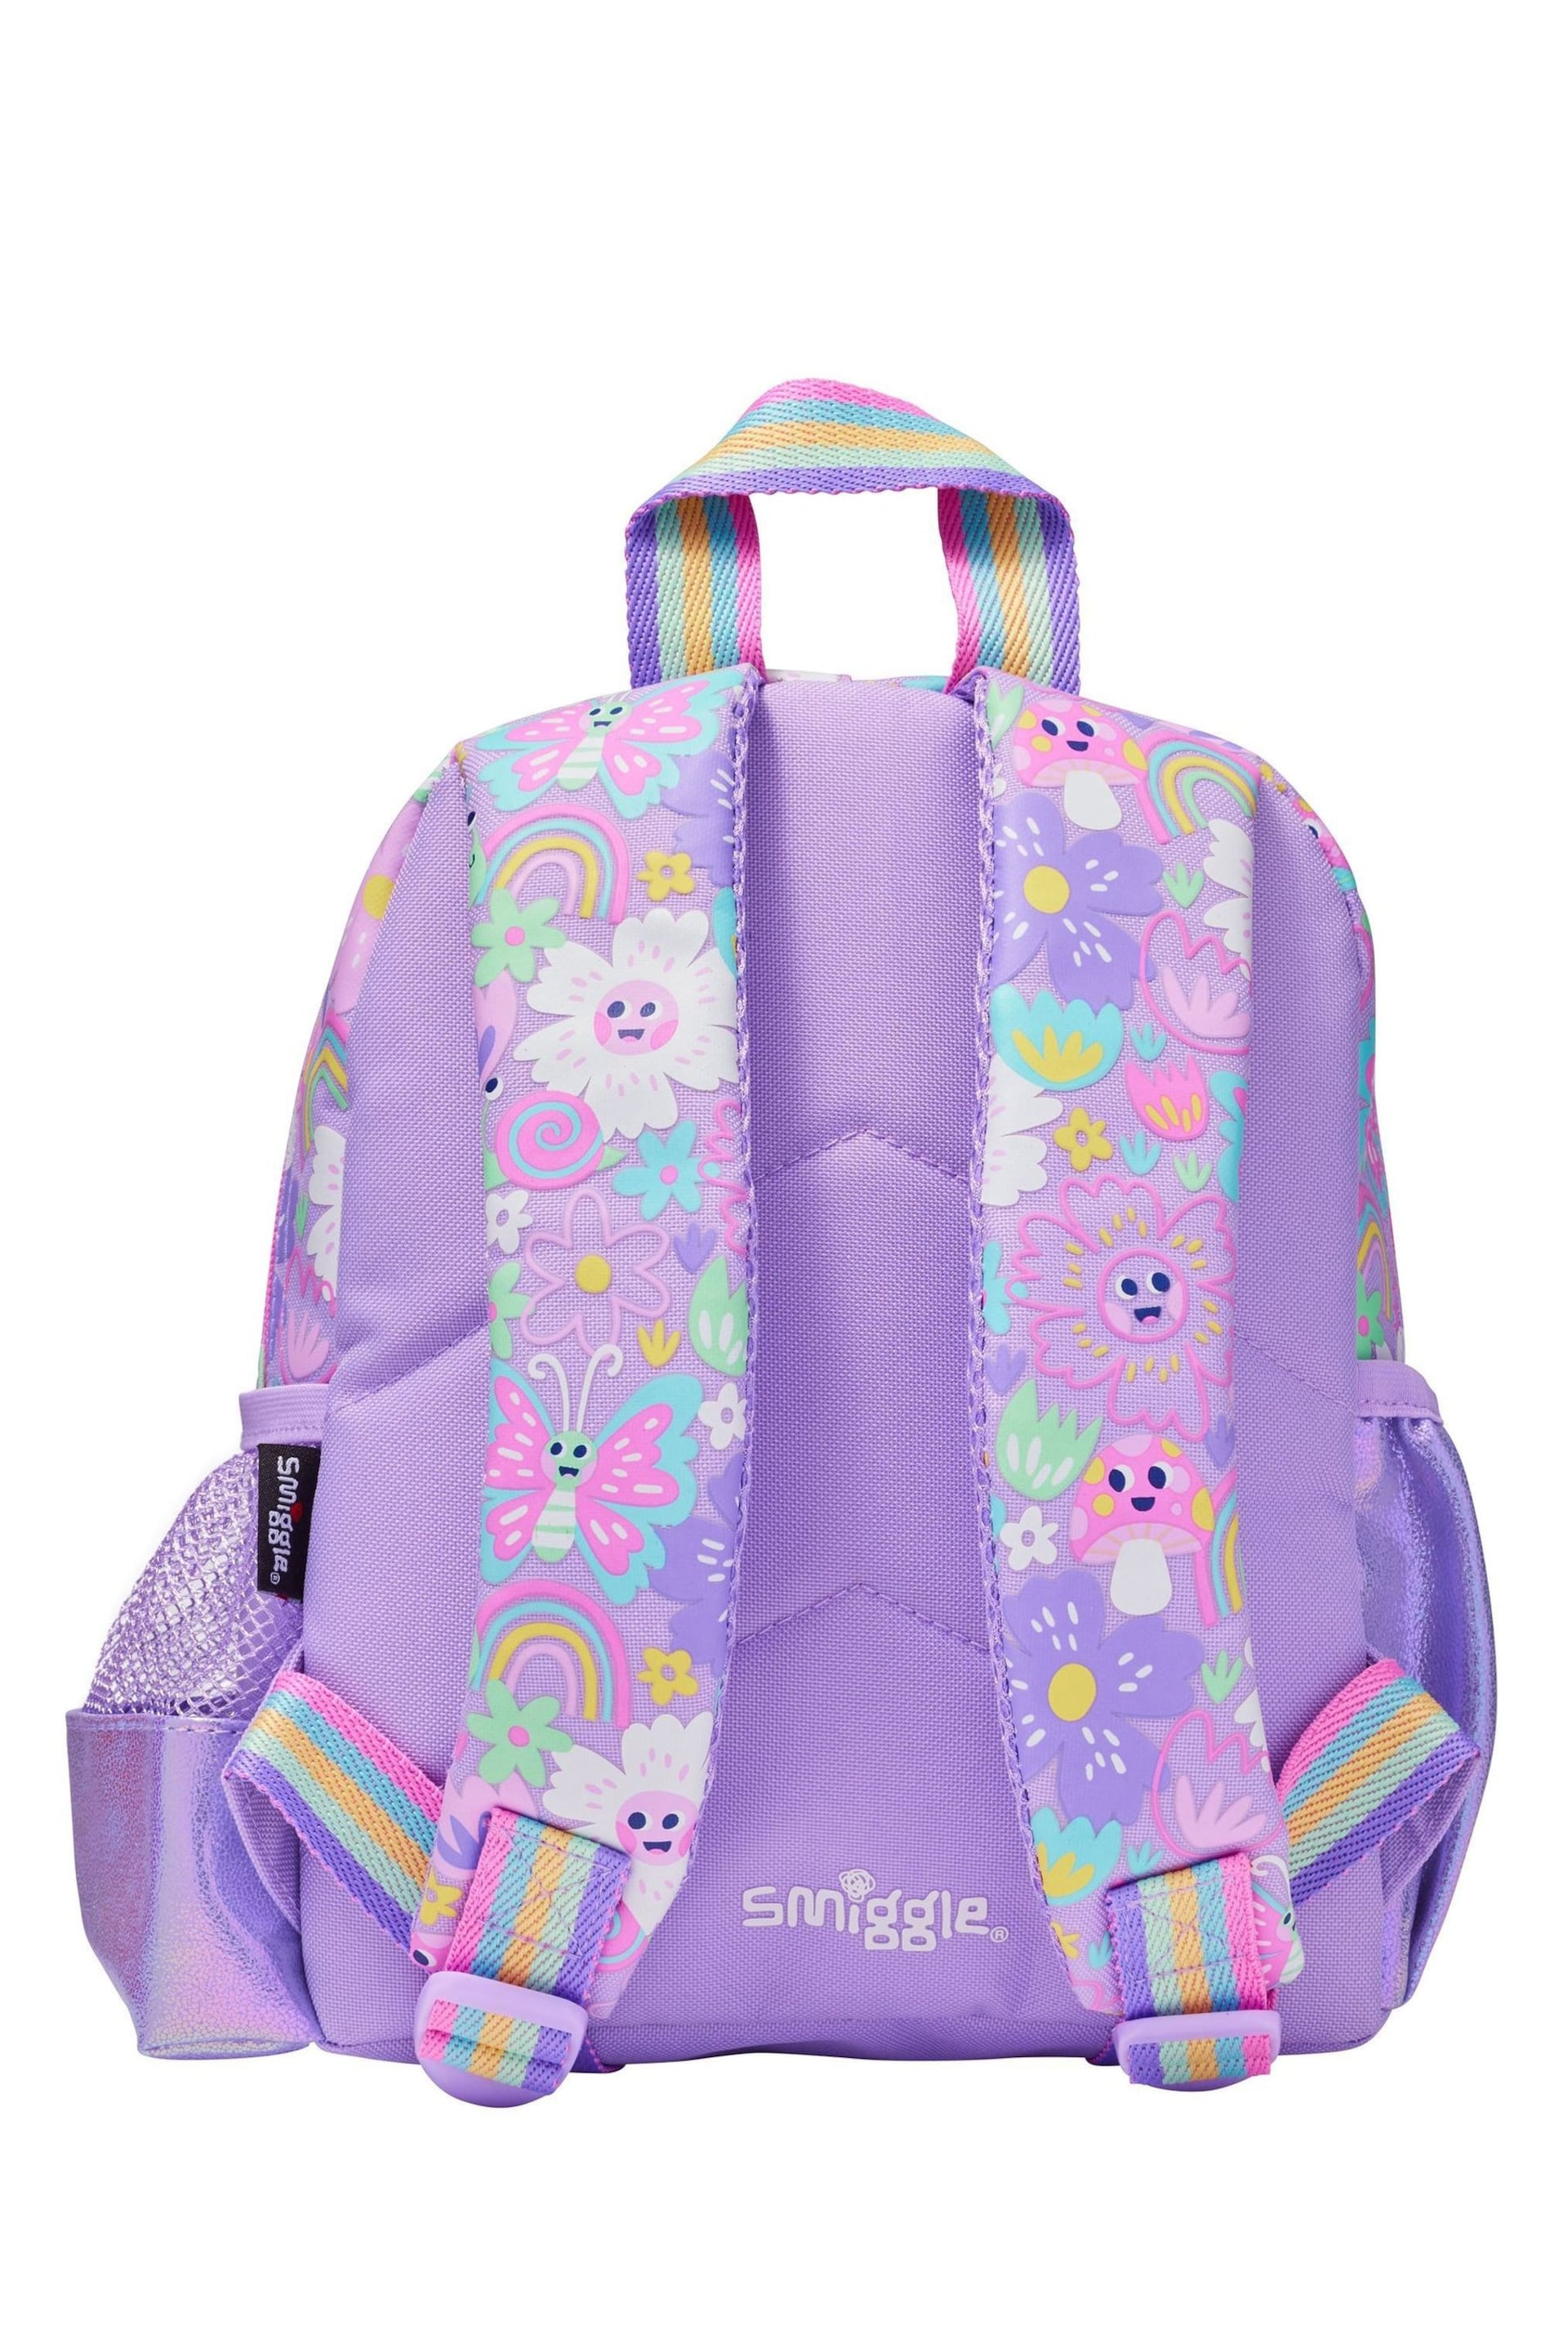 Smiggle Purple Over and Under Teeny Tiny Backpack - Image 4 of 4